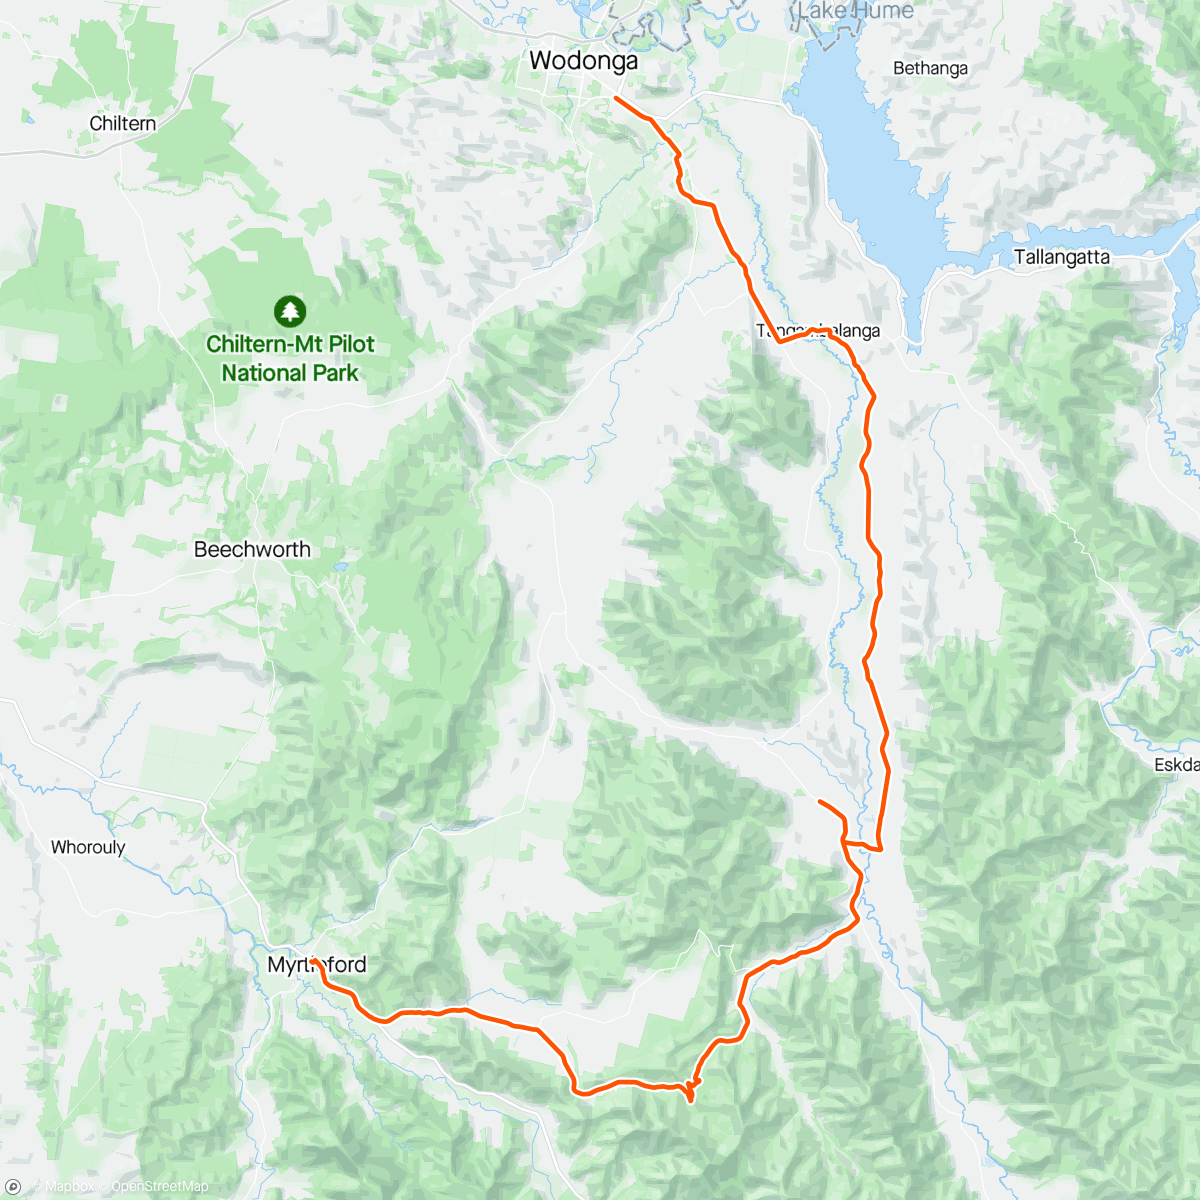 Mapa de la actividad (AB's 'Bon voyage' bikepacking tour - day 2...last chance to enjoy the beautiful high country before French Alps and wineries.)